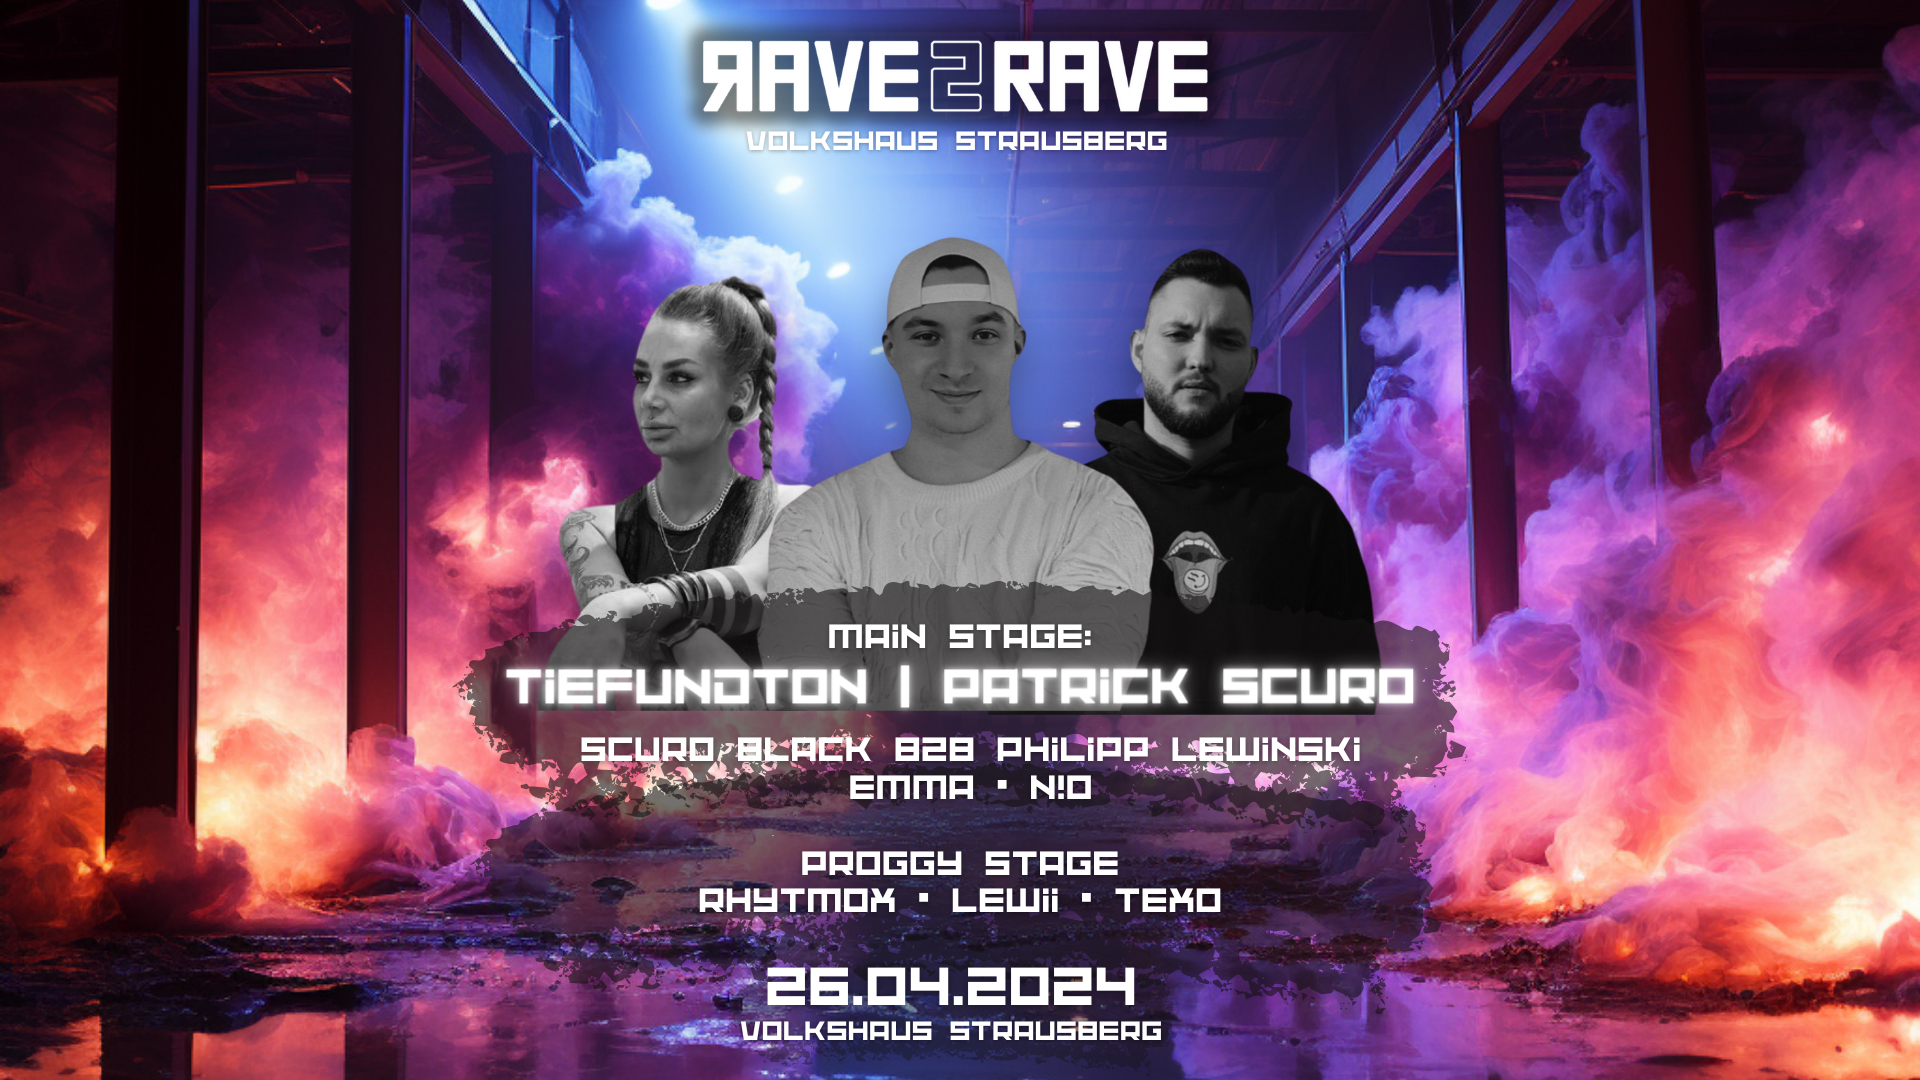 Rave2Rave Strausberg | w/ TIEFUNDTON, Patrick Scuro and many more  - フライヤー表